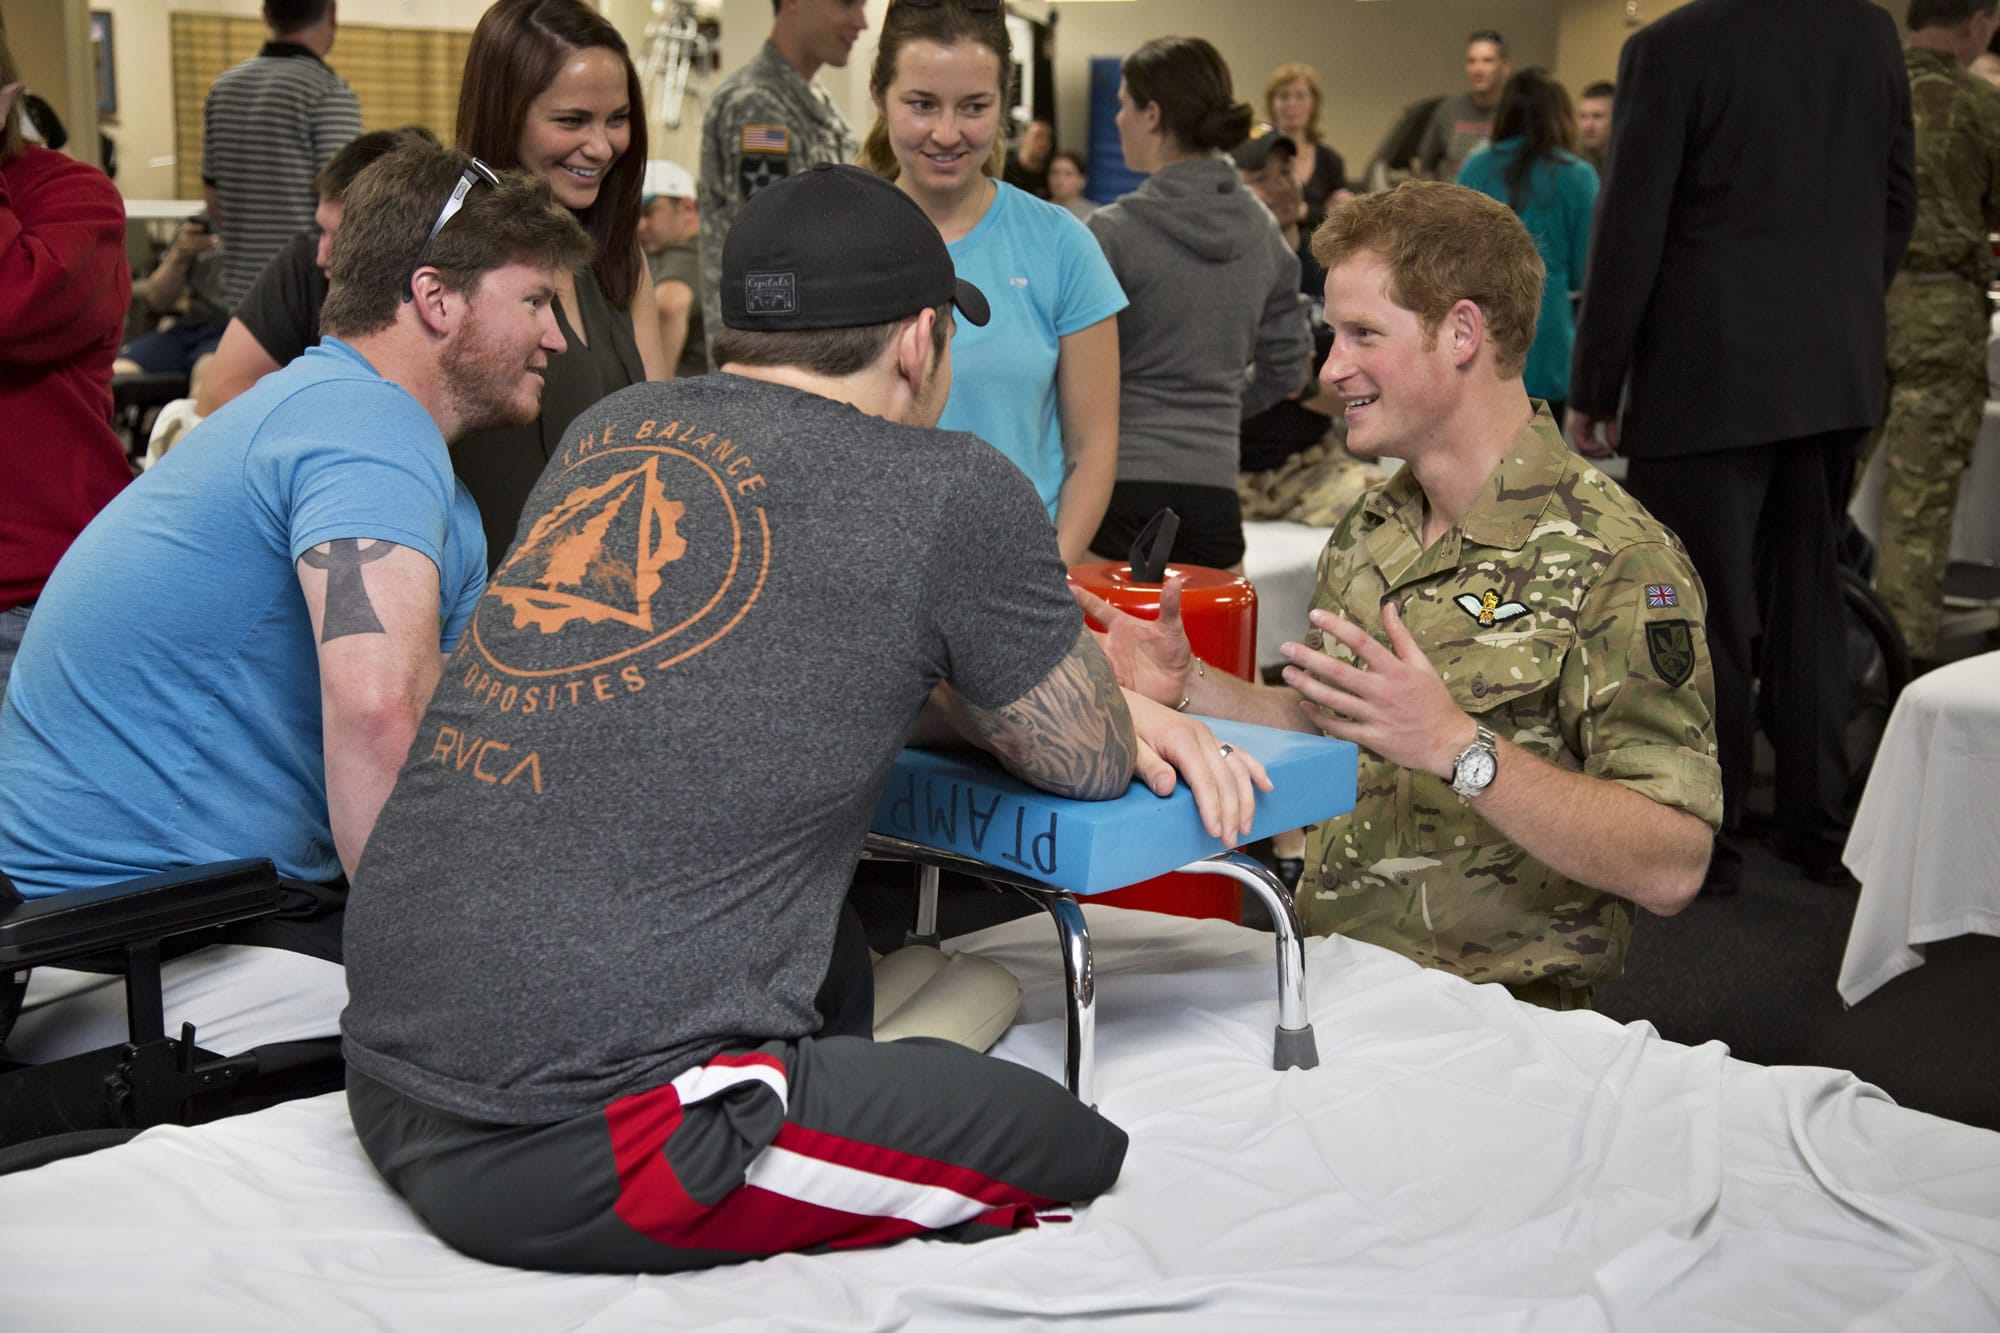 Wearing his British Army uniform, Britain's Prince Harry visits Friday with wounded warriors undergoing physical therapy at the Military Advanced Training Center at Walter Reed National Military Medical Center in Bethesda, Md., just outside Washington.